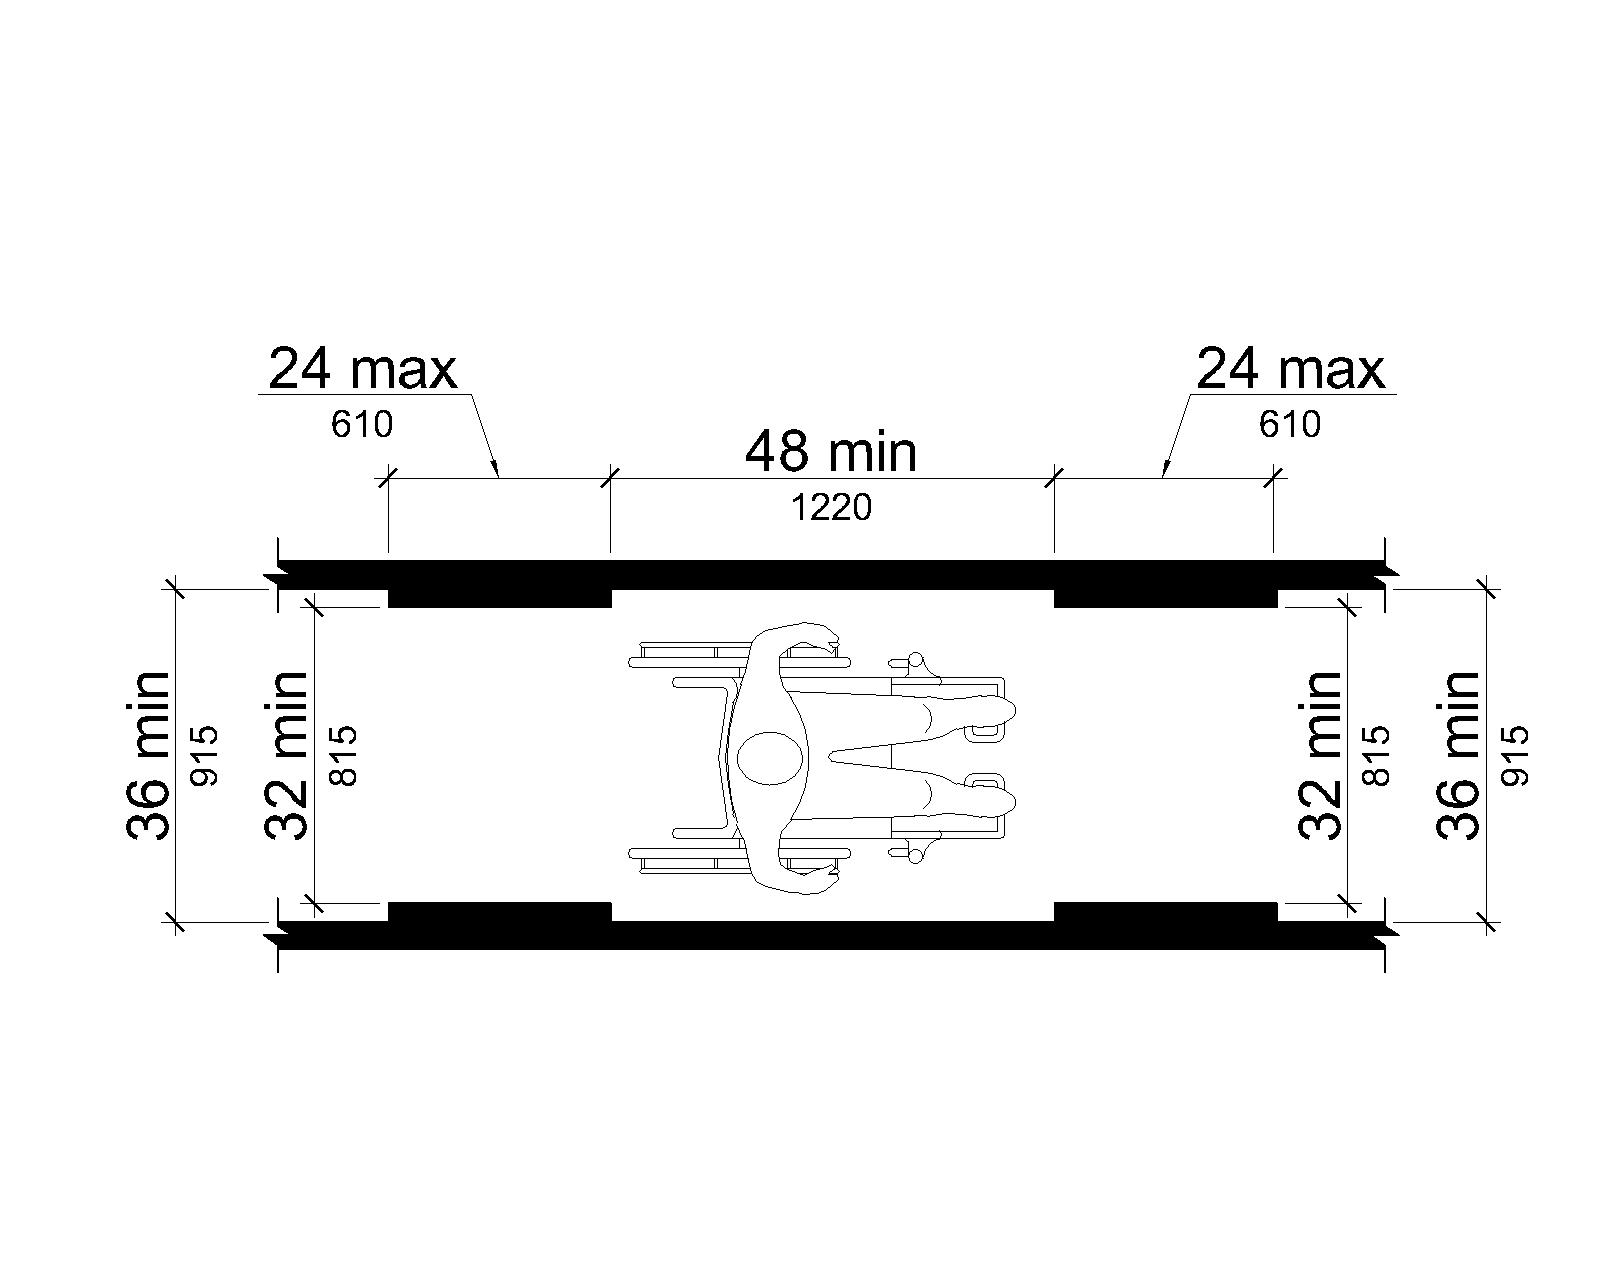 Shown in plan view, the minimum clear width of walking surfaces is 36 inches (915 mm) minimum, but can be reduced to 32 inches (815 mm) for a length of 24 inches (610 mm) maximum, provided that the reduced width segments are at least 48 inches (1220 mm) apart.